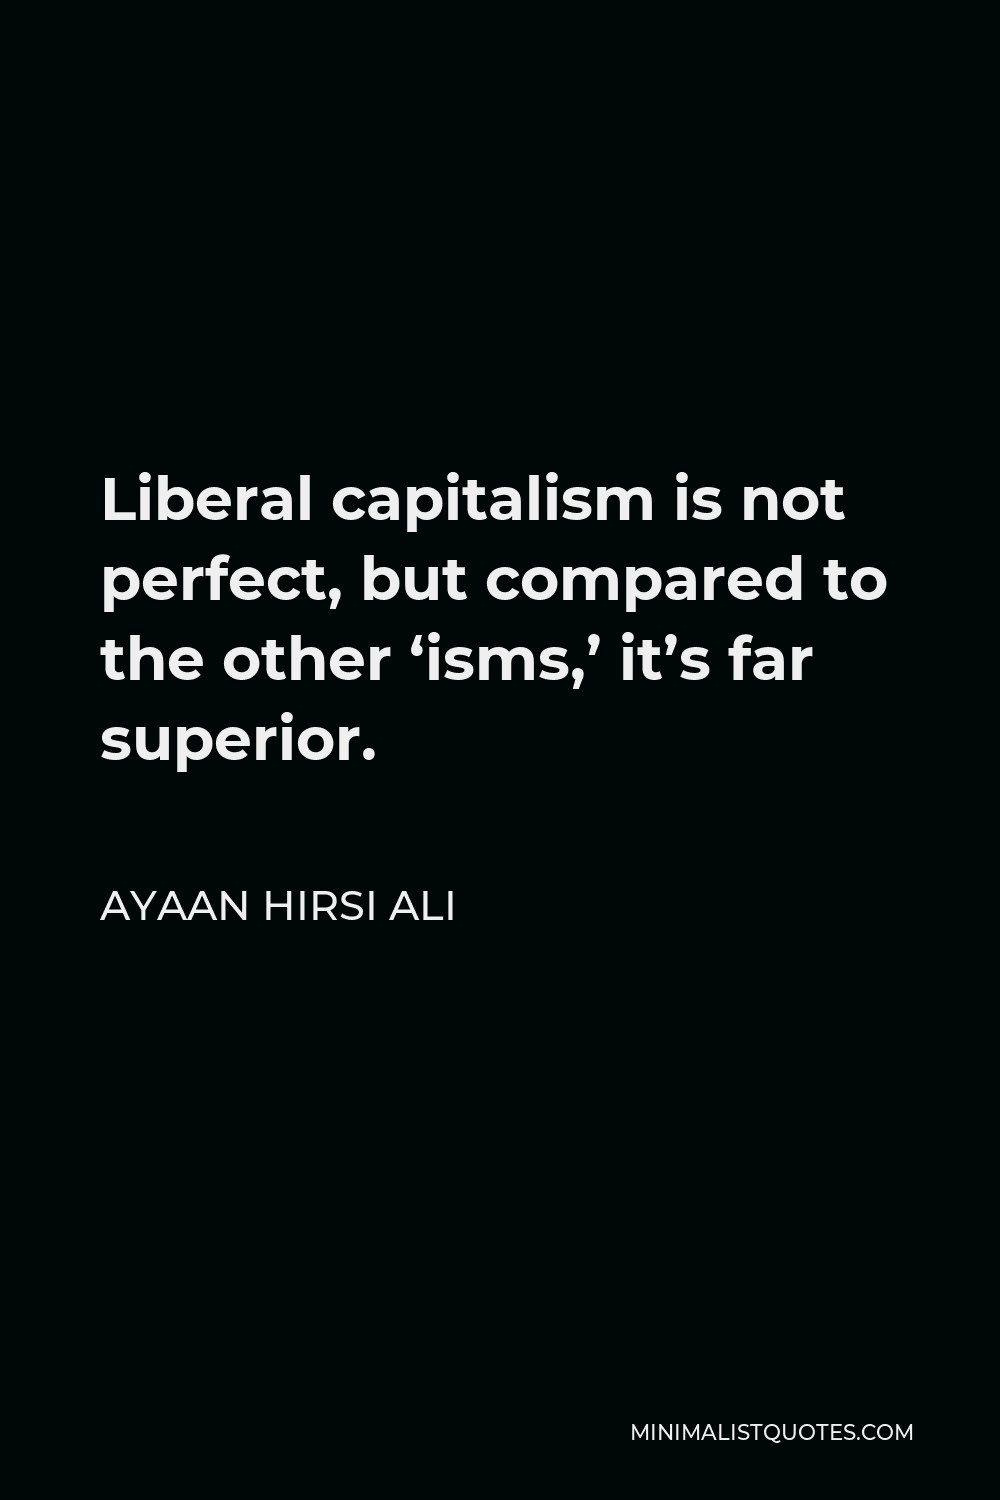 Ayaan Hirsi Ali Quote - Liberal capitalism is not perfect, but compared to the other ‘isms,’ it’s far superior.